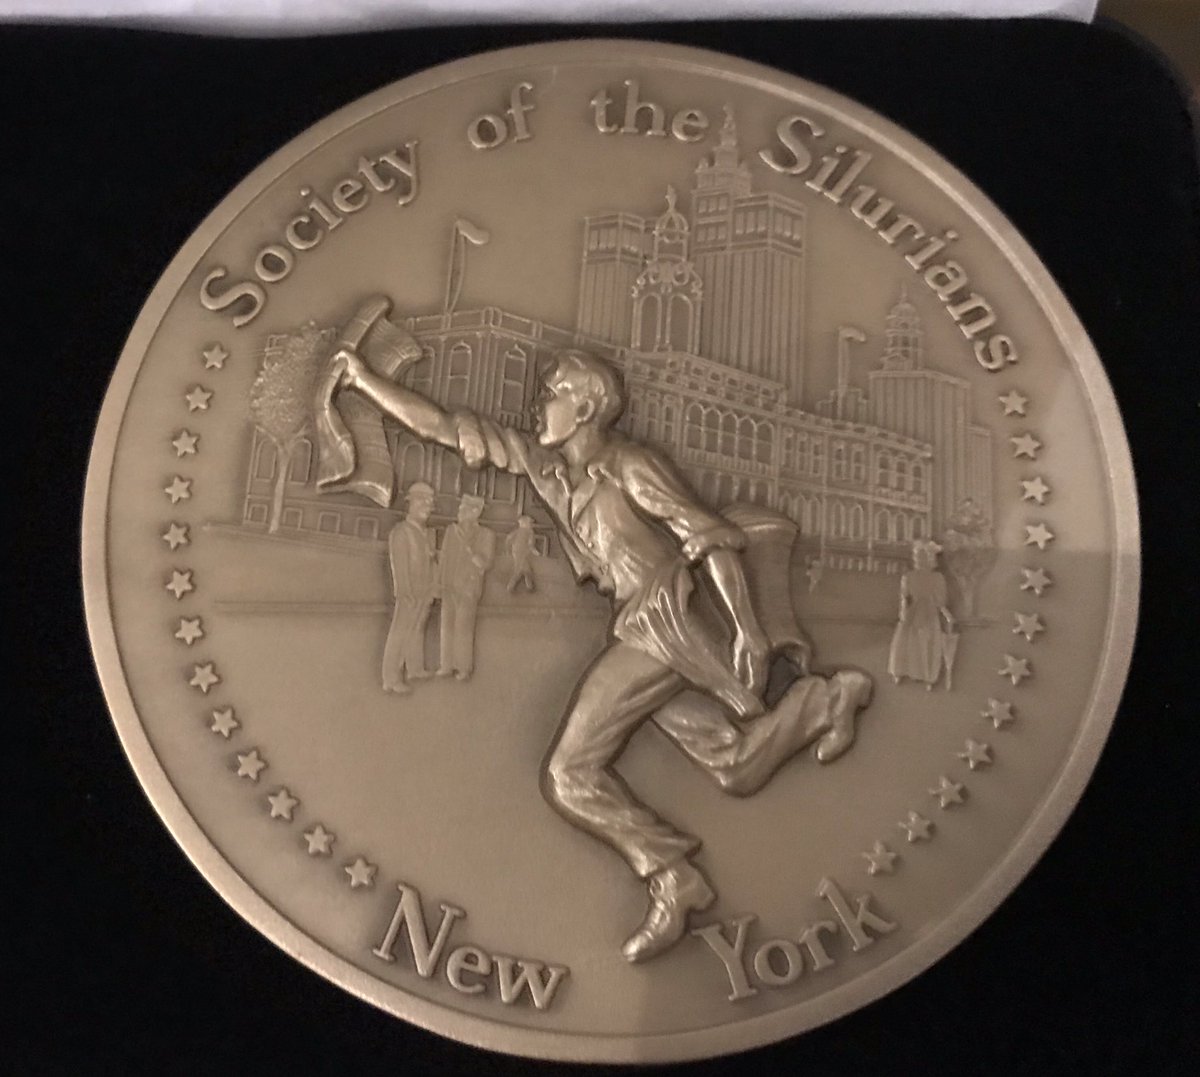 Honored to stand with my “Toxic Secrets” compadres  @JamesMONeill1, @bedjack tonight. We received a medallion from the Society of Silurians press club for our 2018 series on DuPont pollution in Pompton Lakes that lead to @NewJerseyOAG suing the company.
northjersey.com/story/news/wat…